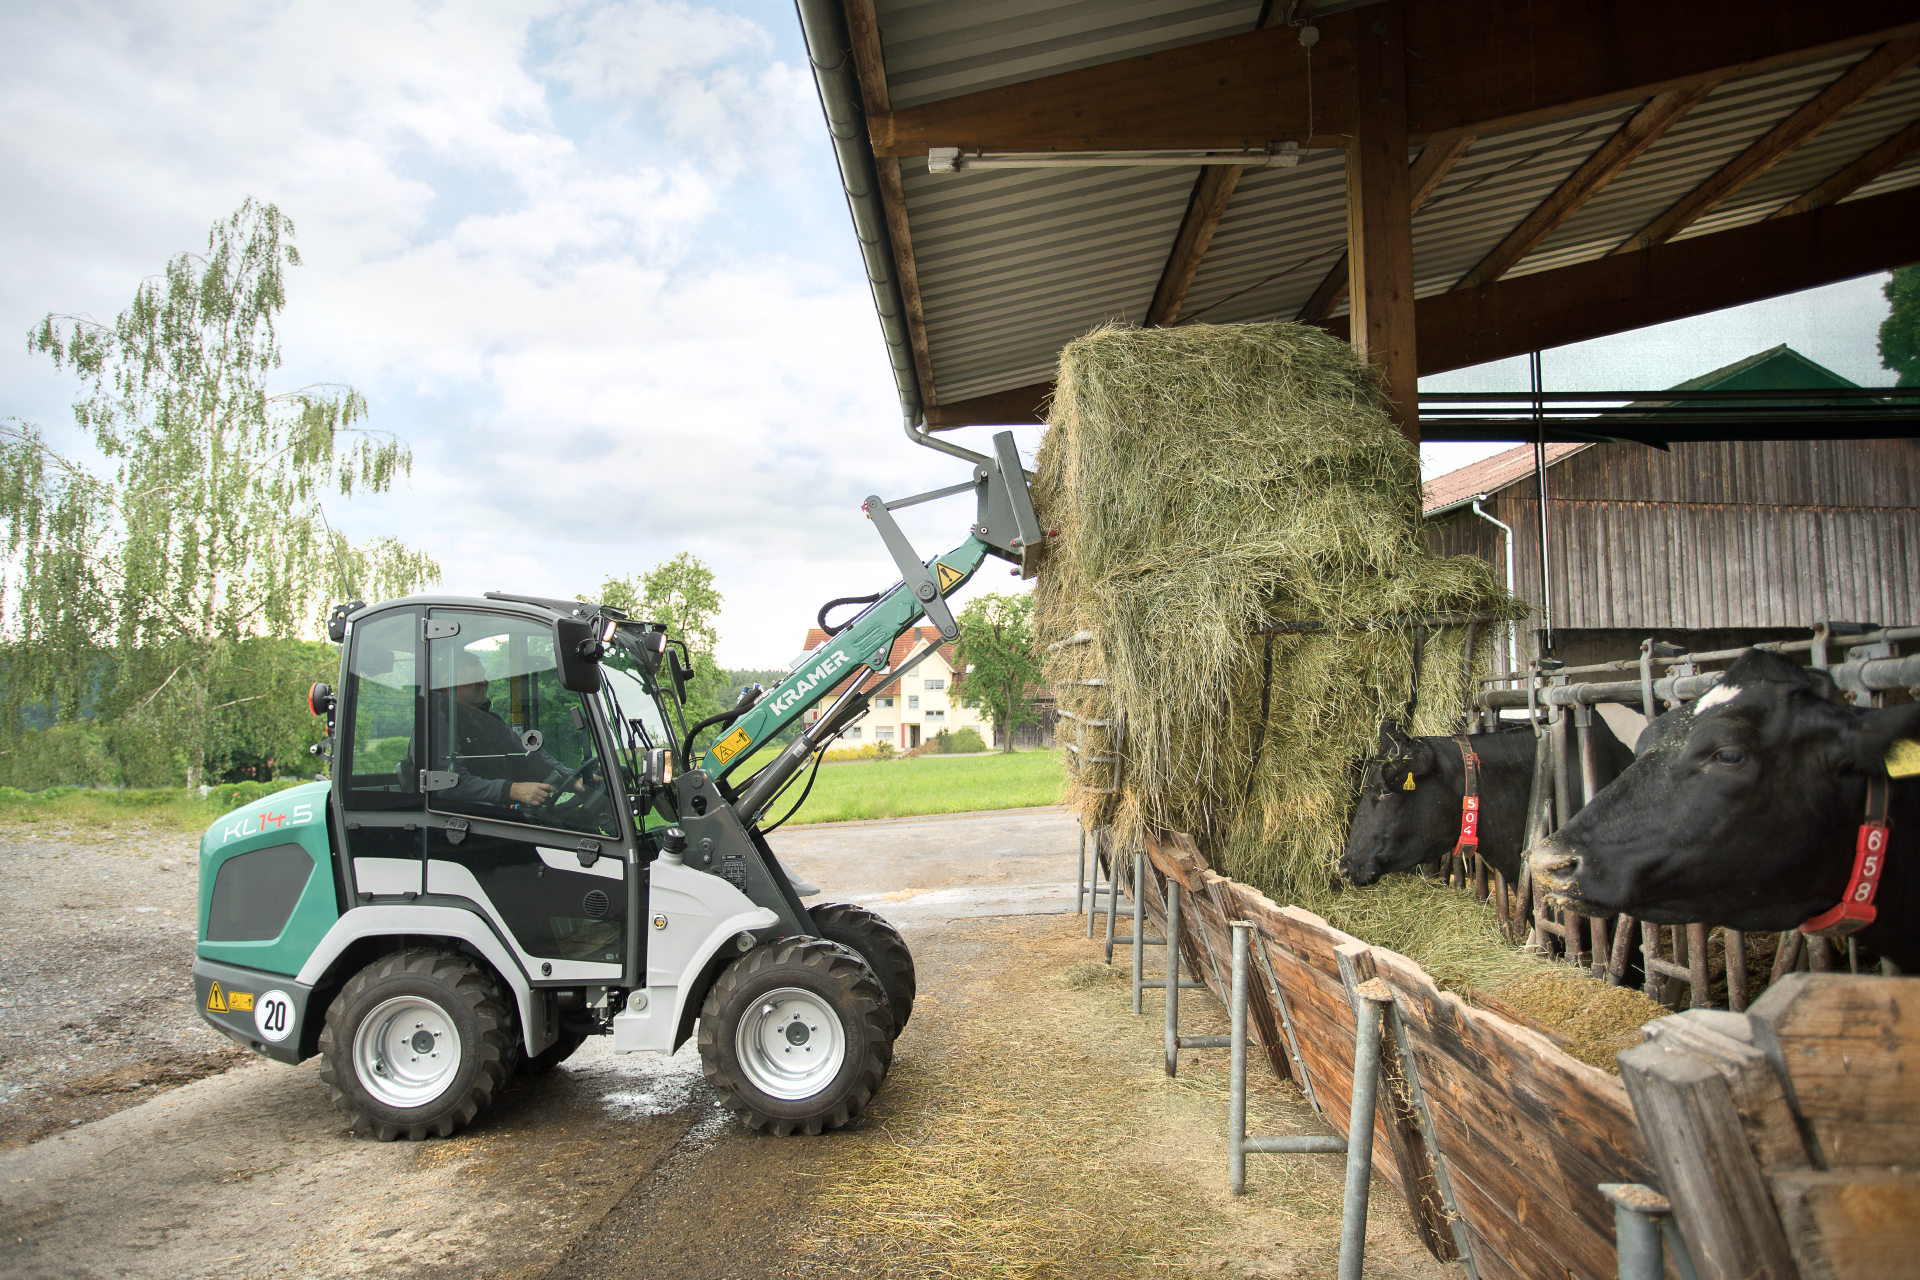 The compact KL14.5 while loading straw for the animal feeding.